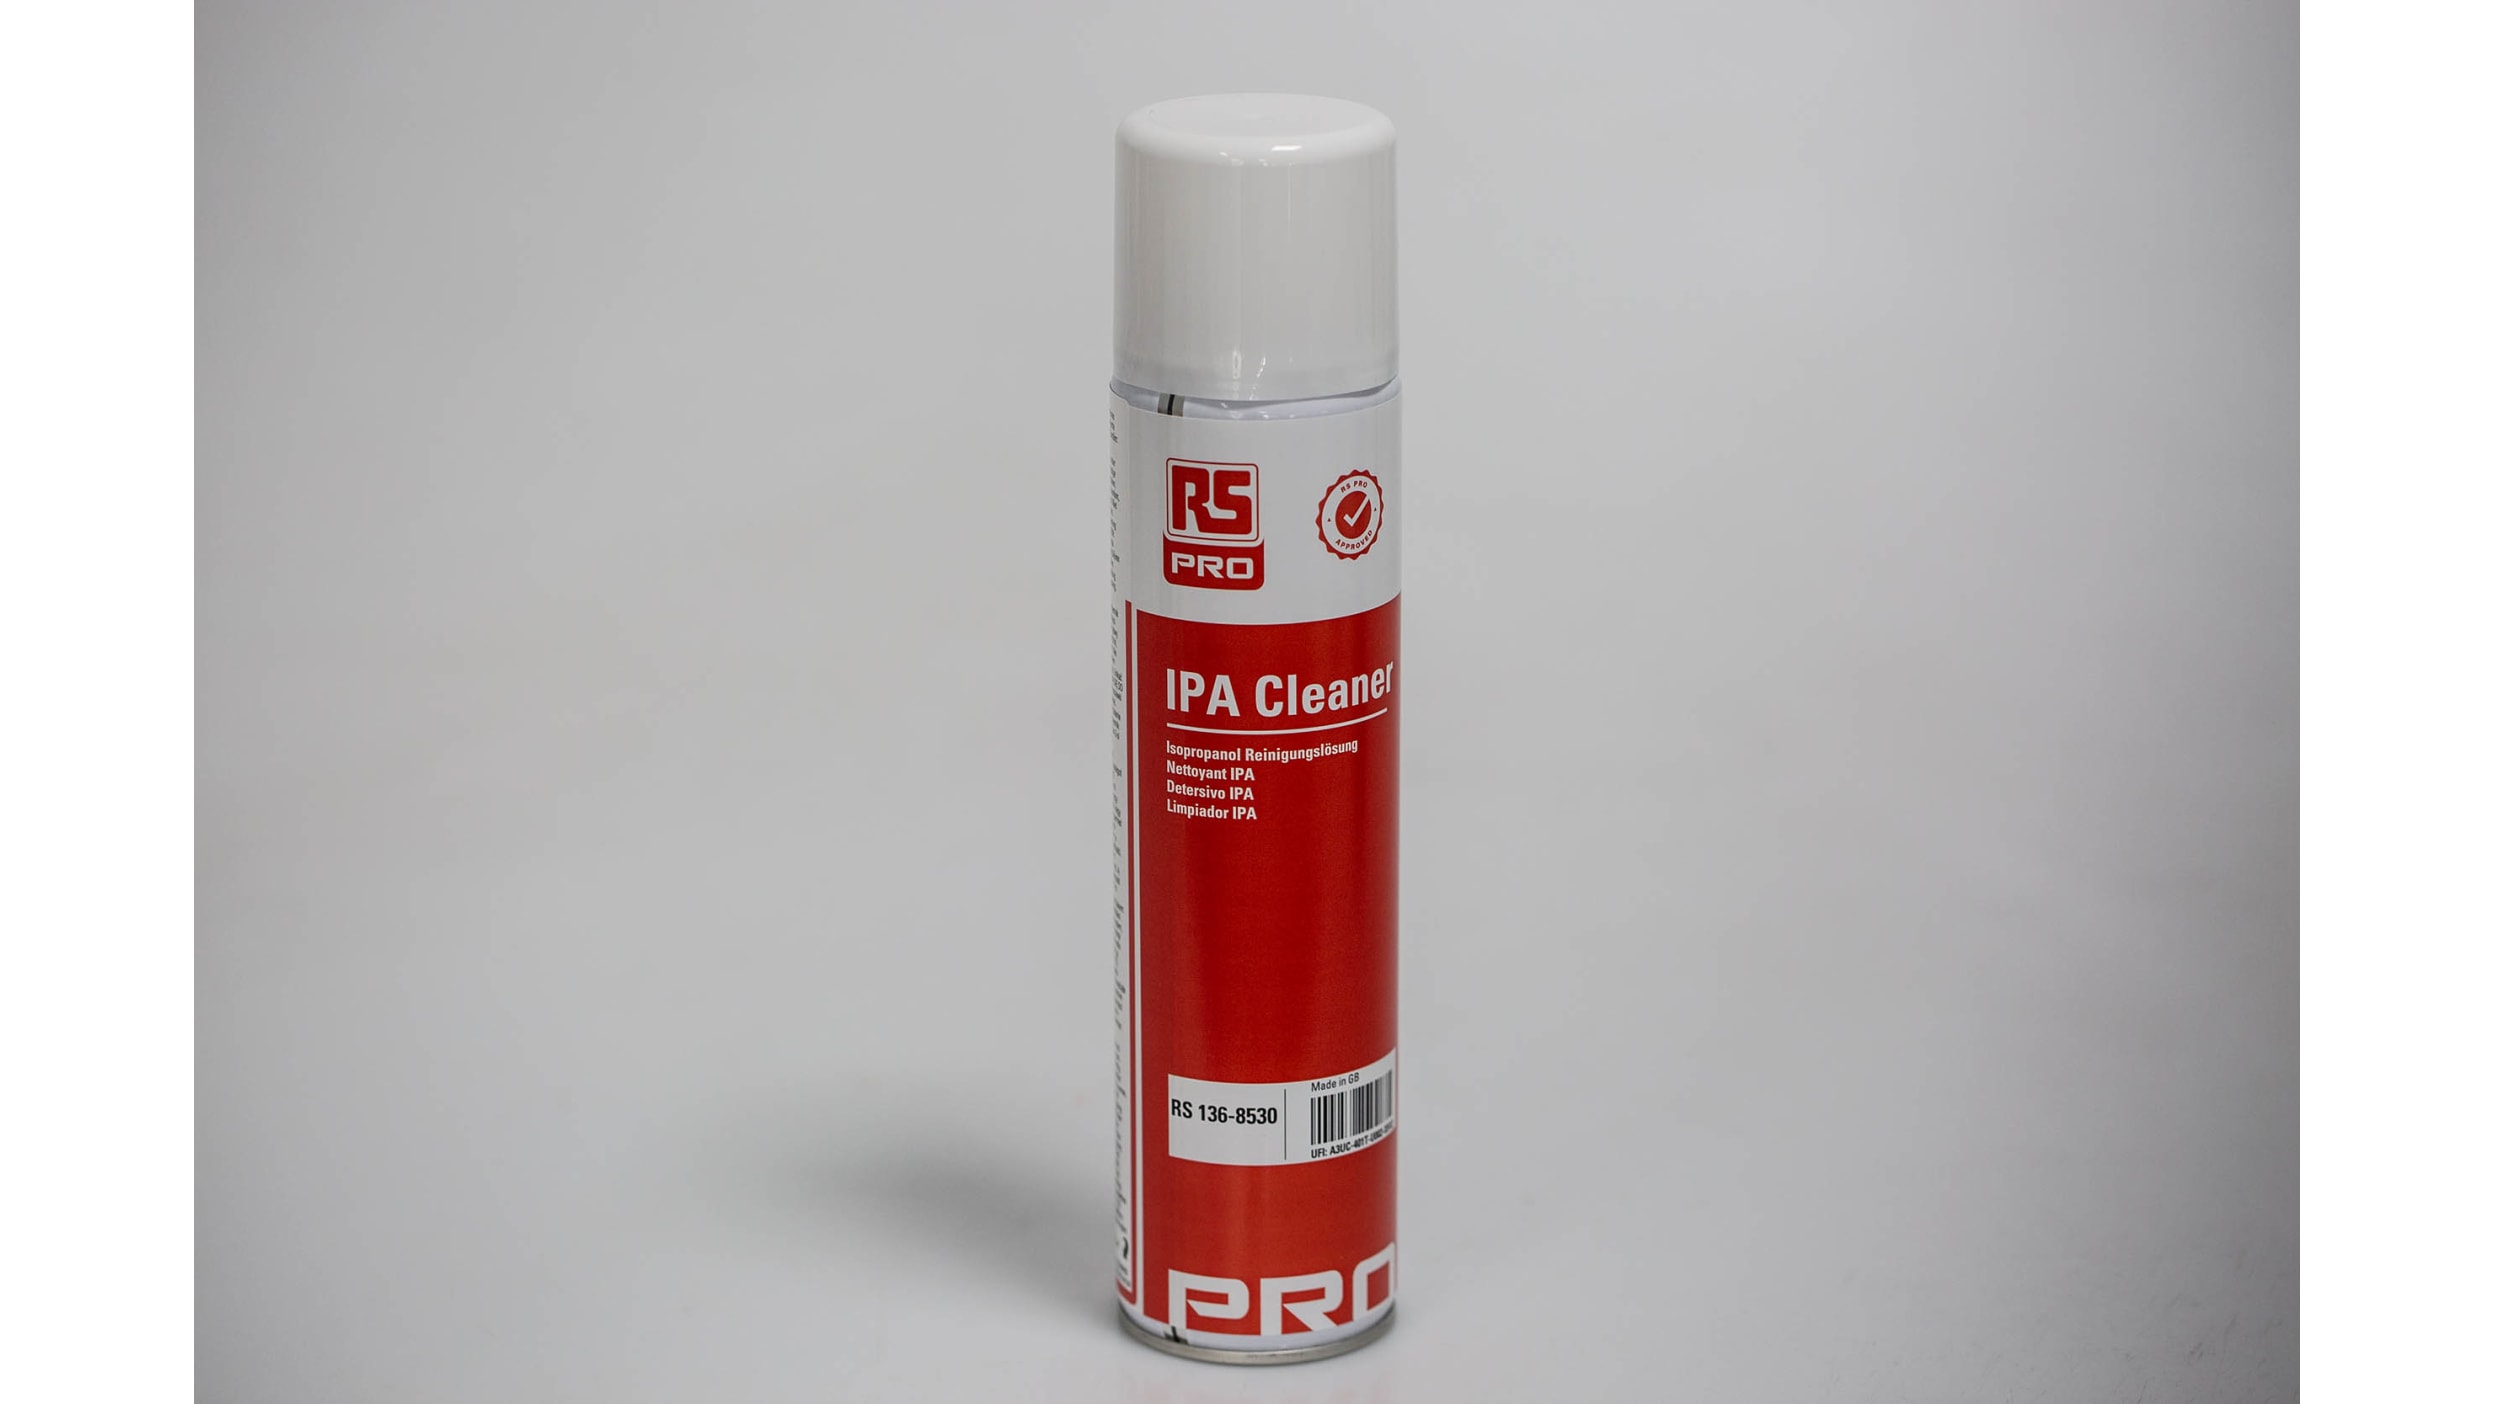 MP003924 - Multicomp Pro - Cleaner, IPA Electronics, Surface